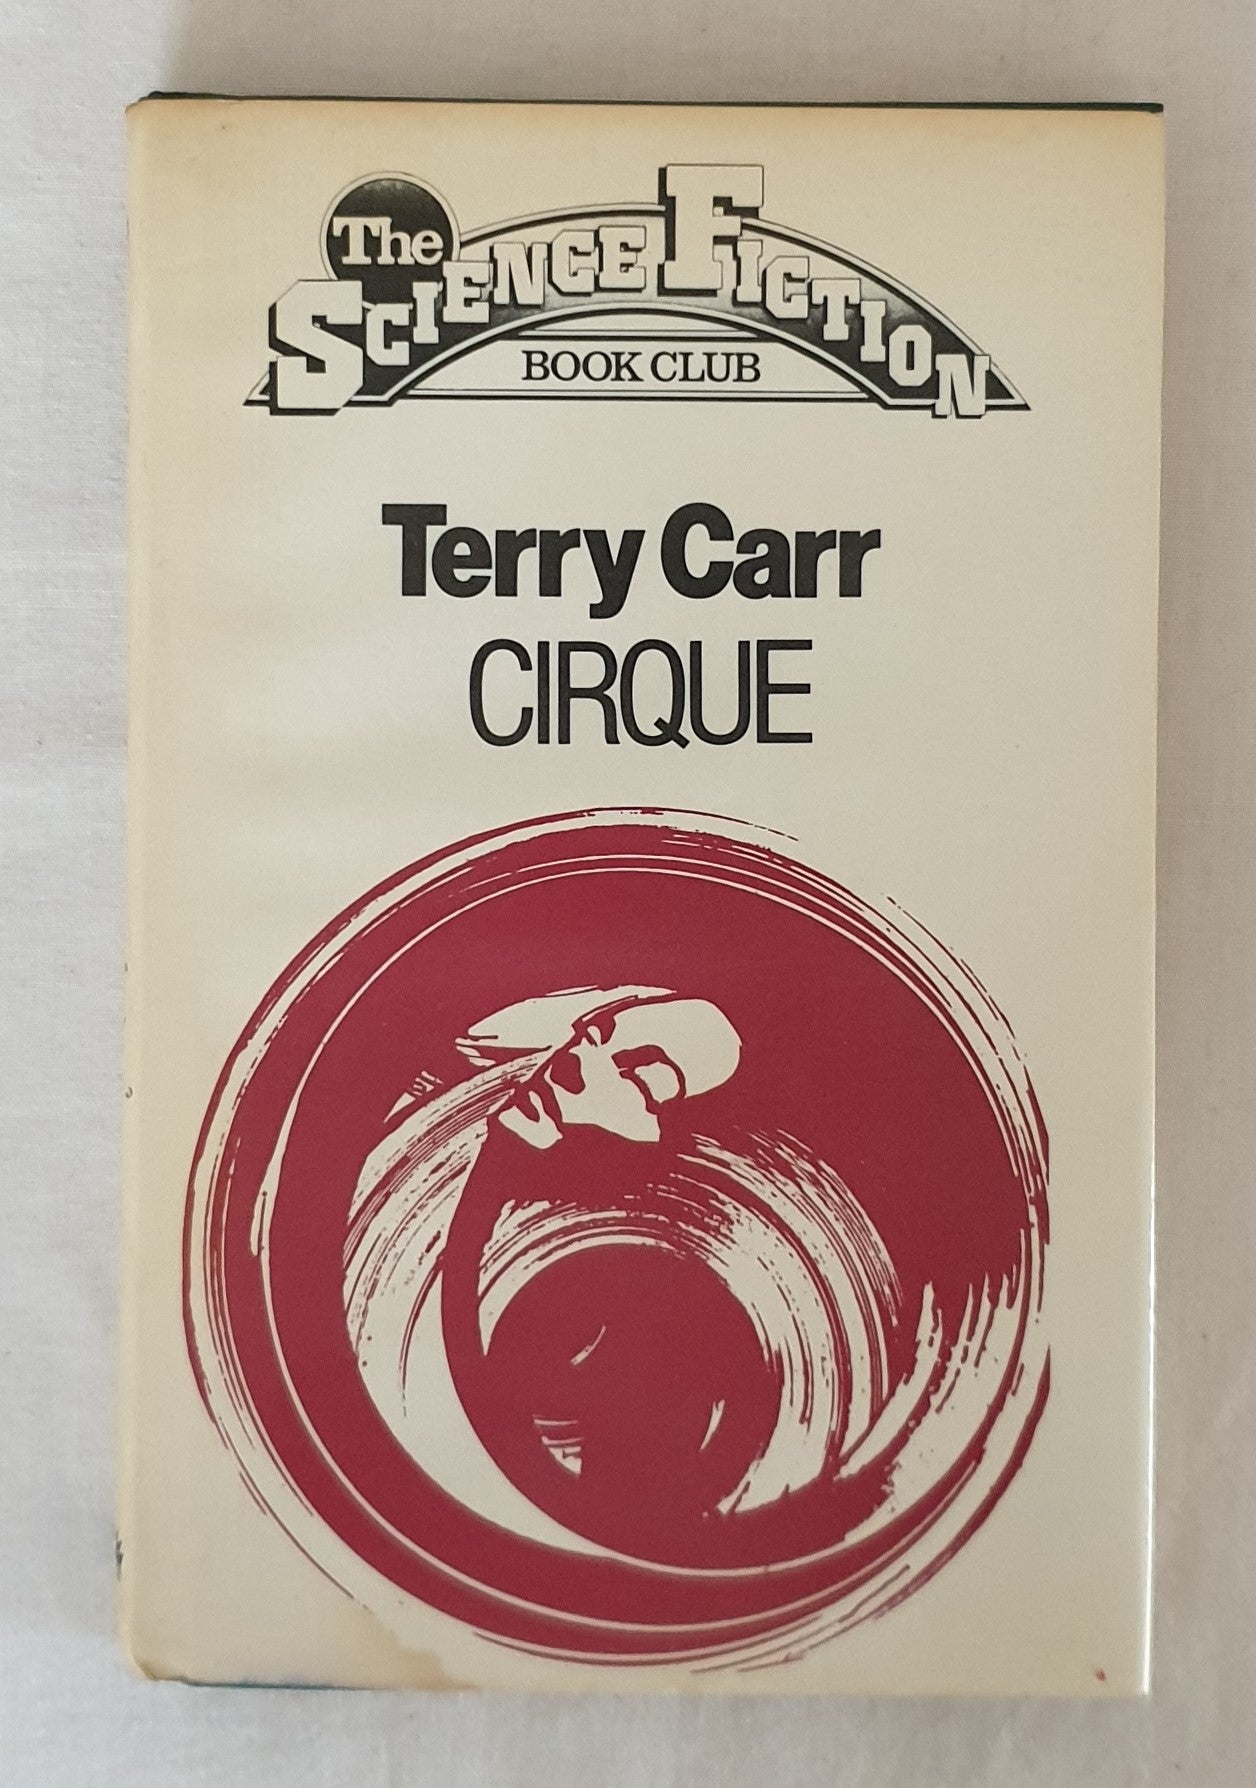 Cirque by Terry Carr